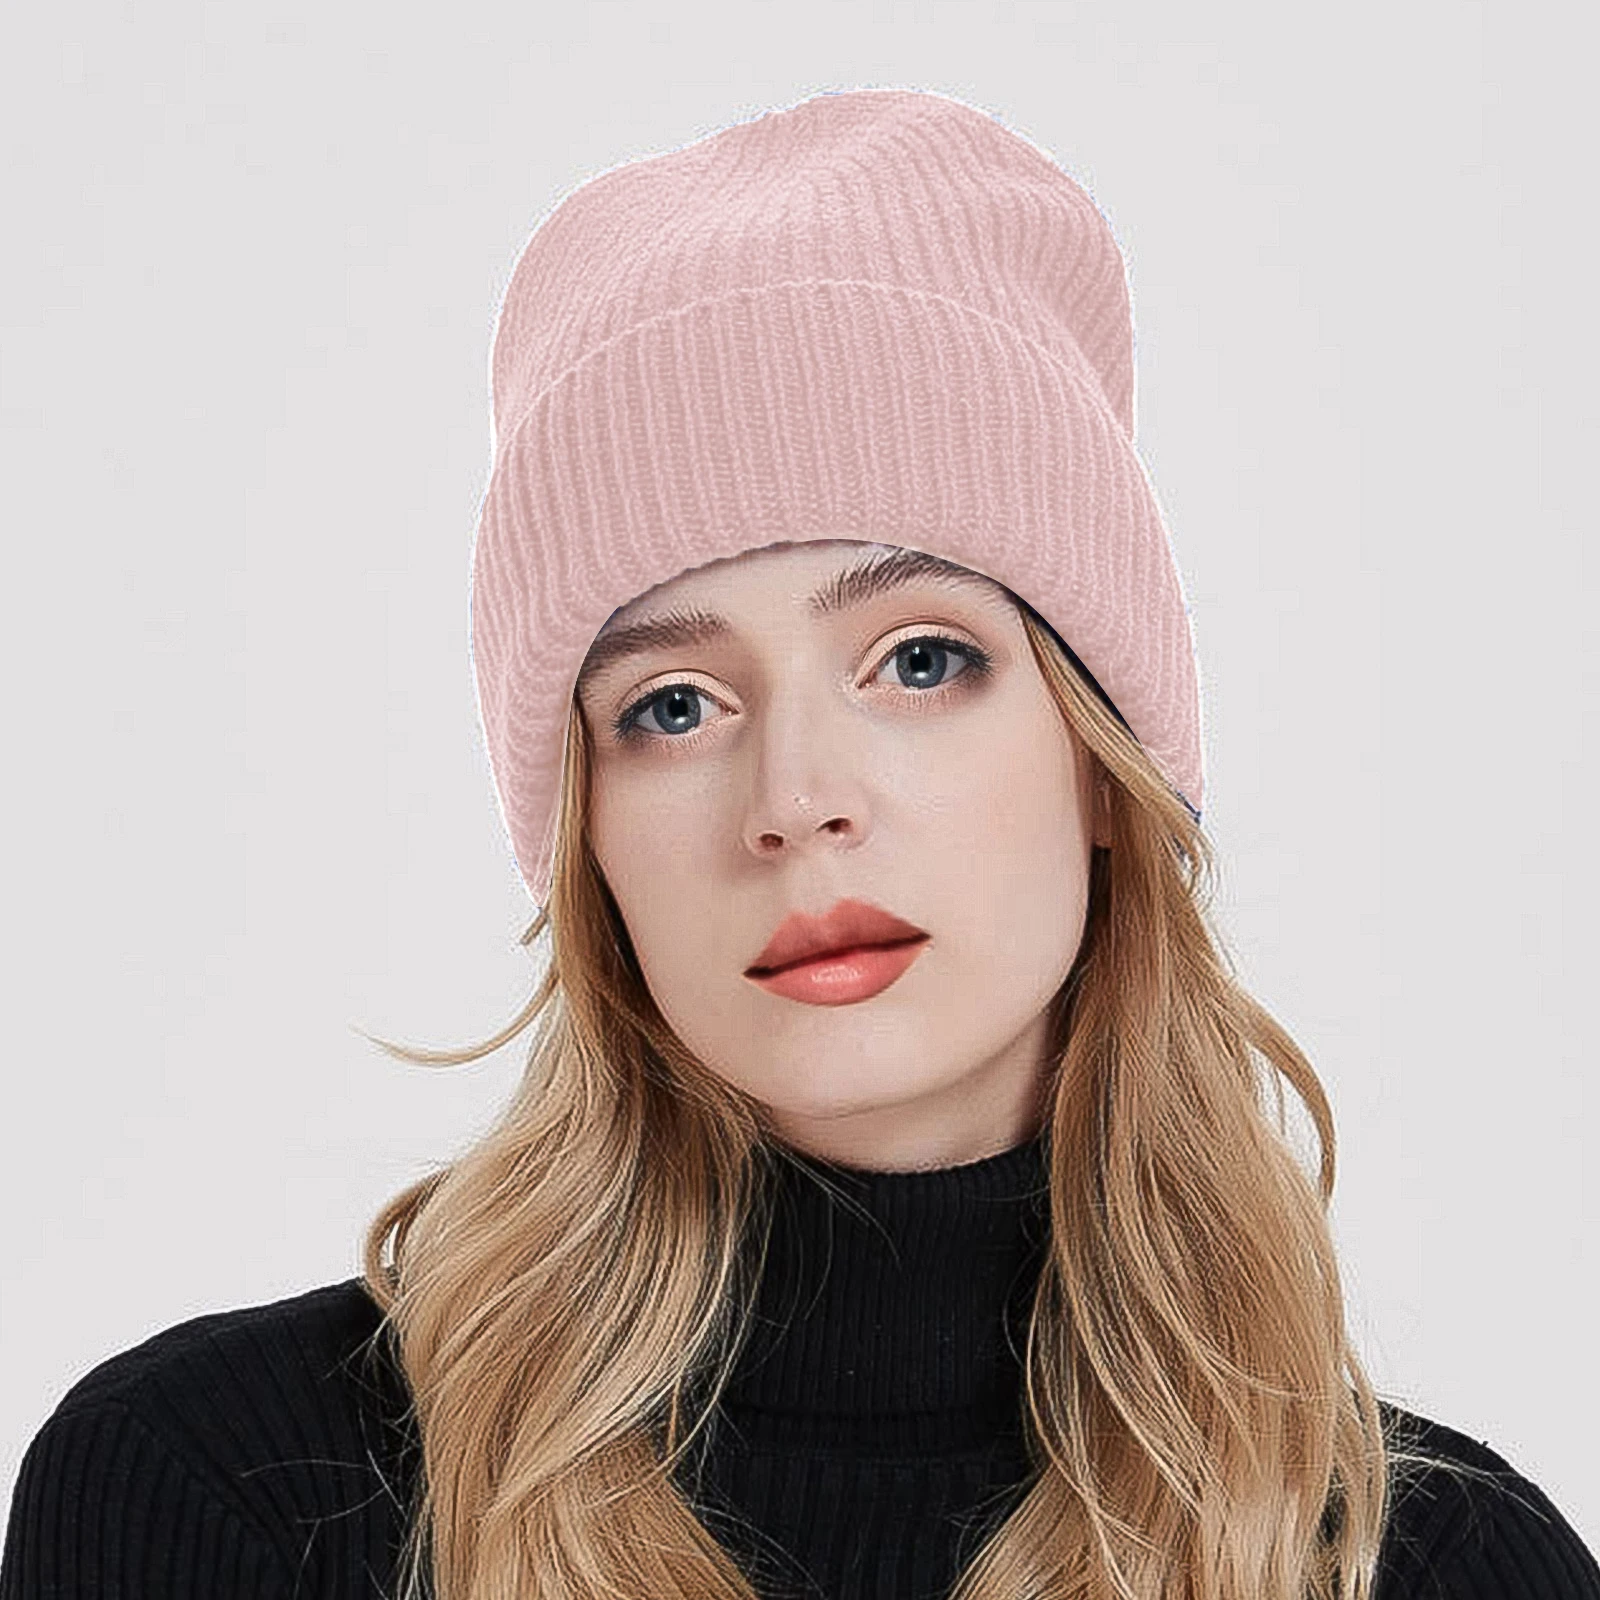 

Women Men Slouchy Beanie Soft Solid Color Winter Knitted Hats Warm Skull Caps for Streetwear Clothing Accessory